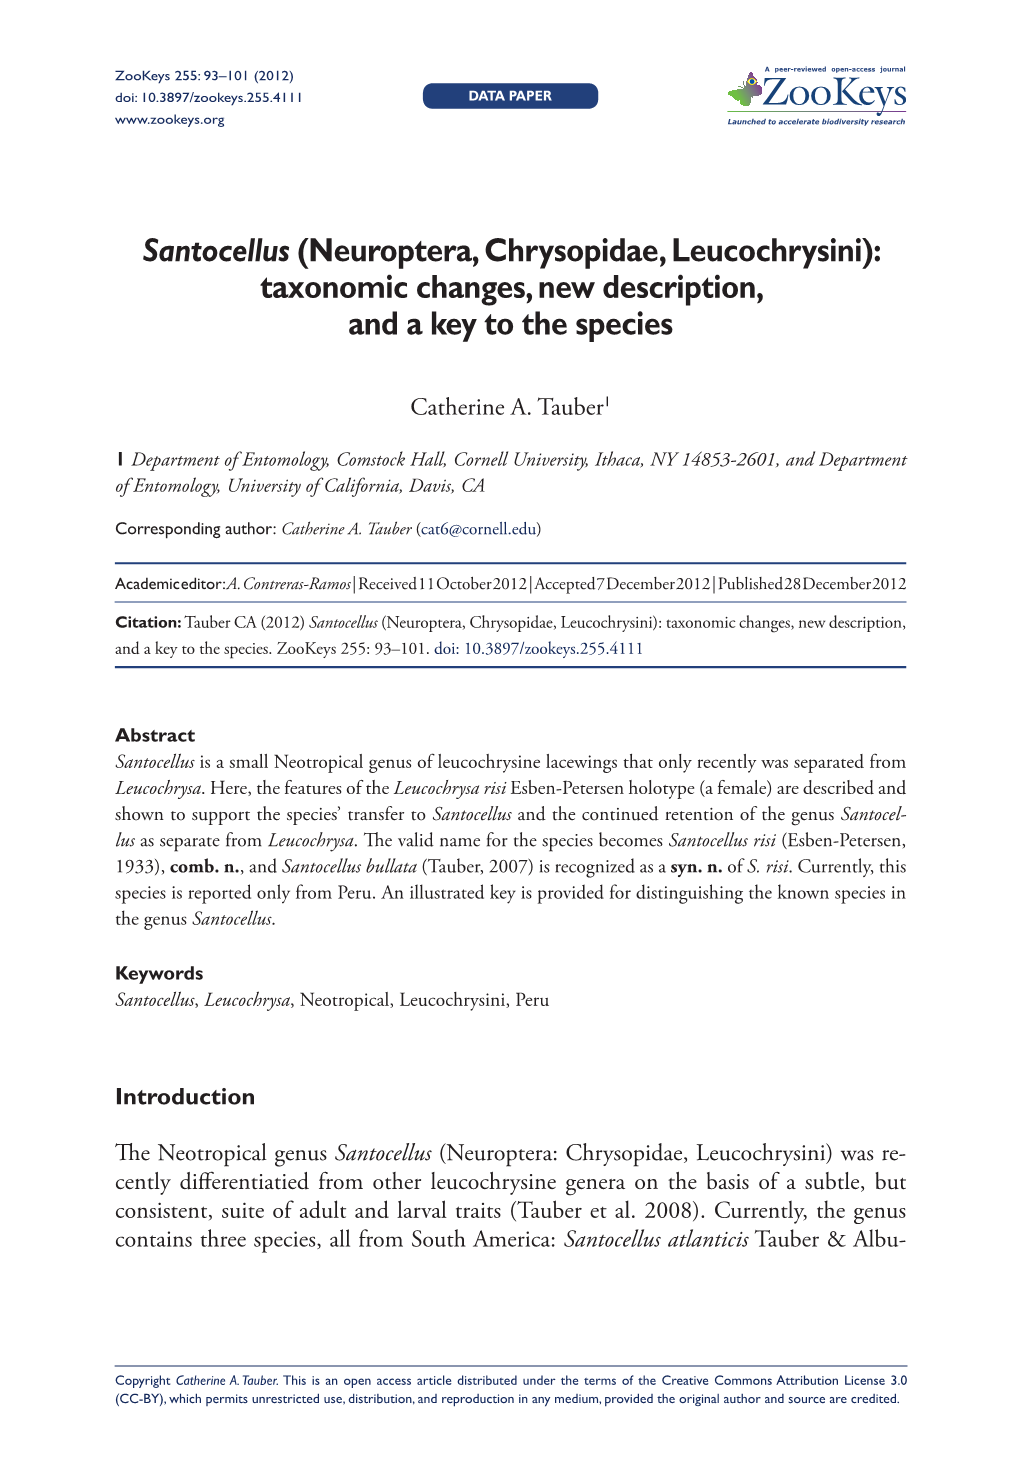 Neuroptera, Chrysopidae, Leucochrysini): Taxonomic Changes, New Description, and a Key to the Species